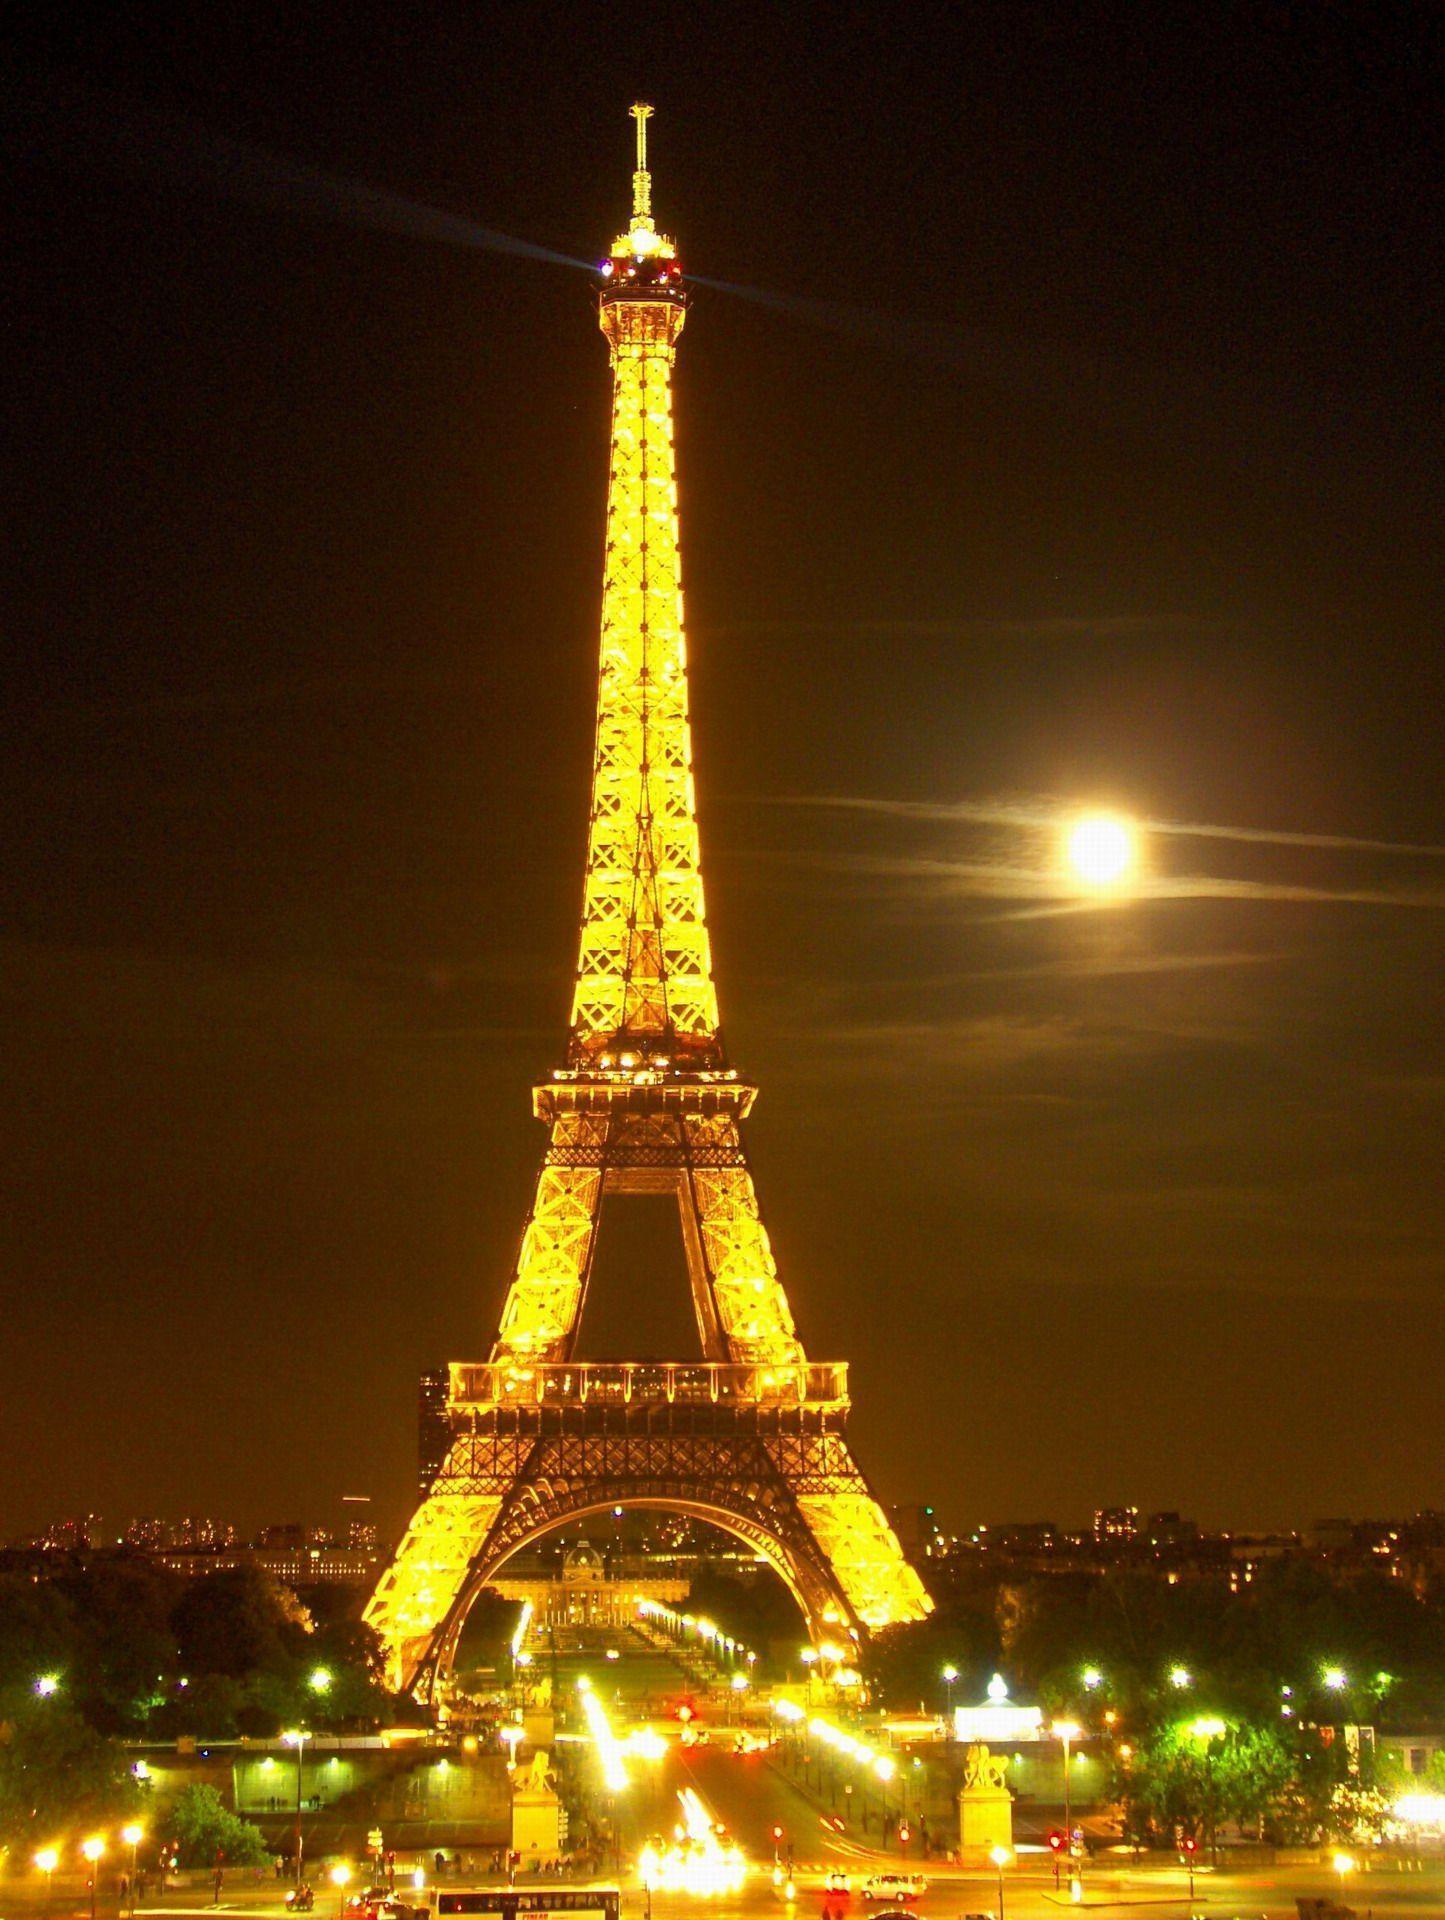 The Eiffel Tower in a moonlit night, France Travel photo